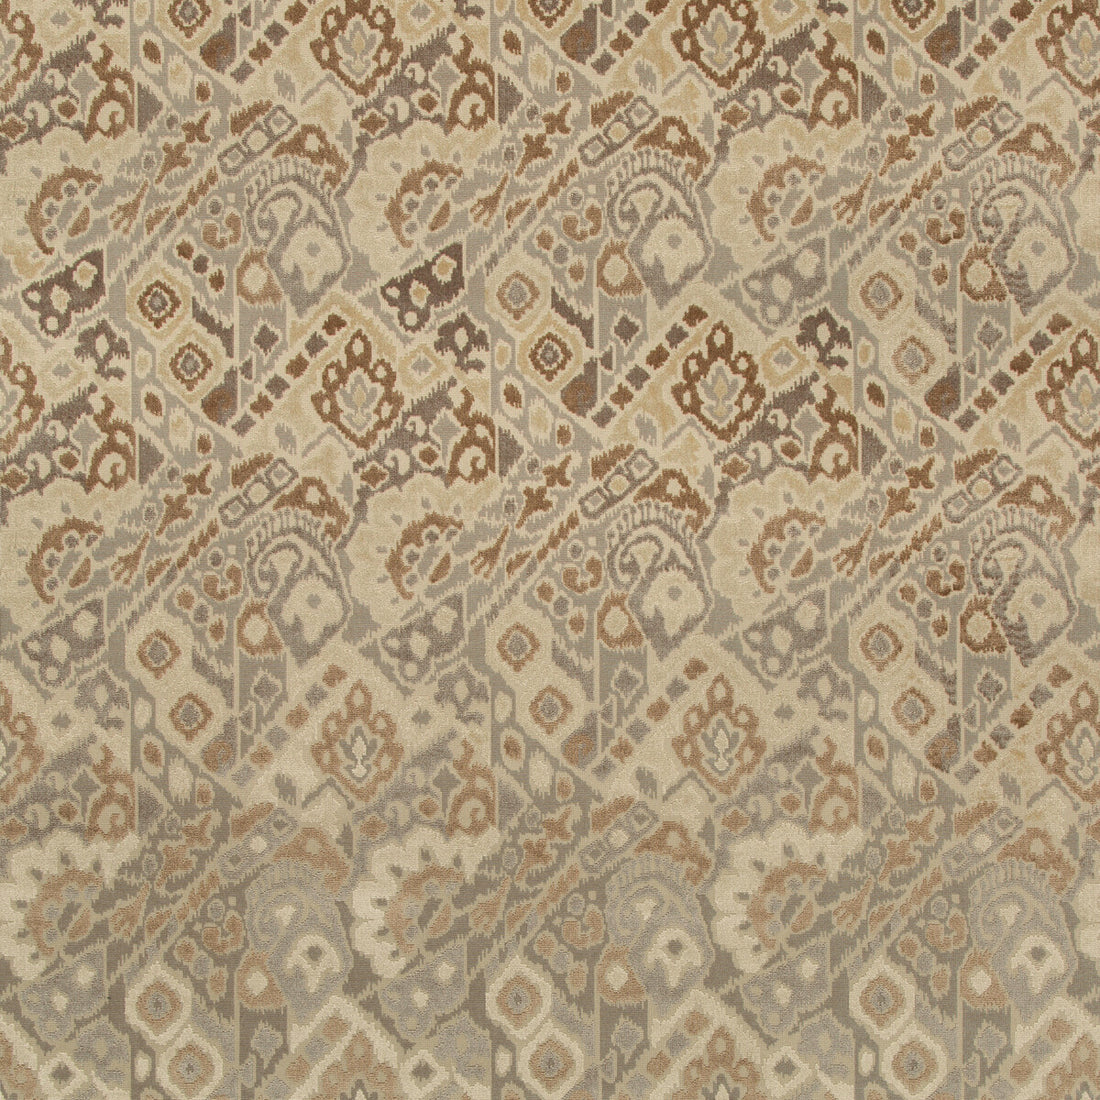 Salengro Velvet fabric in sandstone color - pattern 8019109.1611.0 - by Brunschwig &amp; Fils in the Folio Francais collection